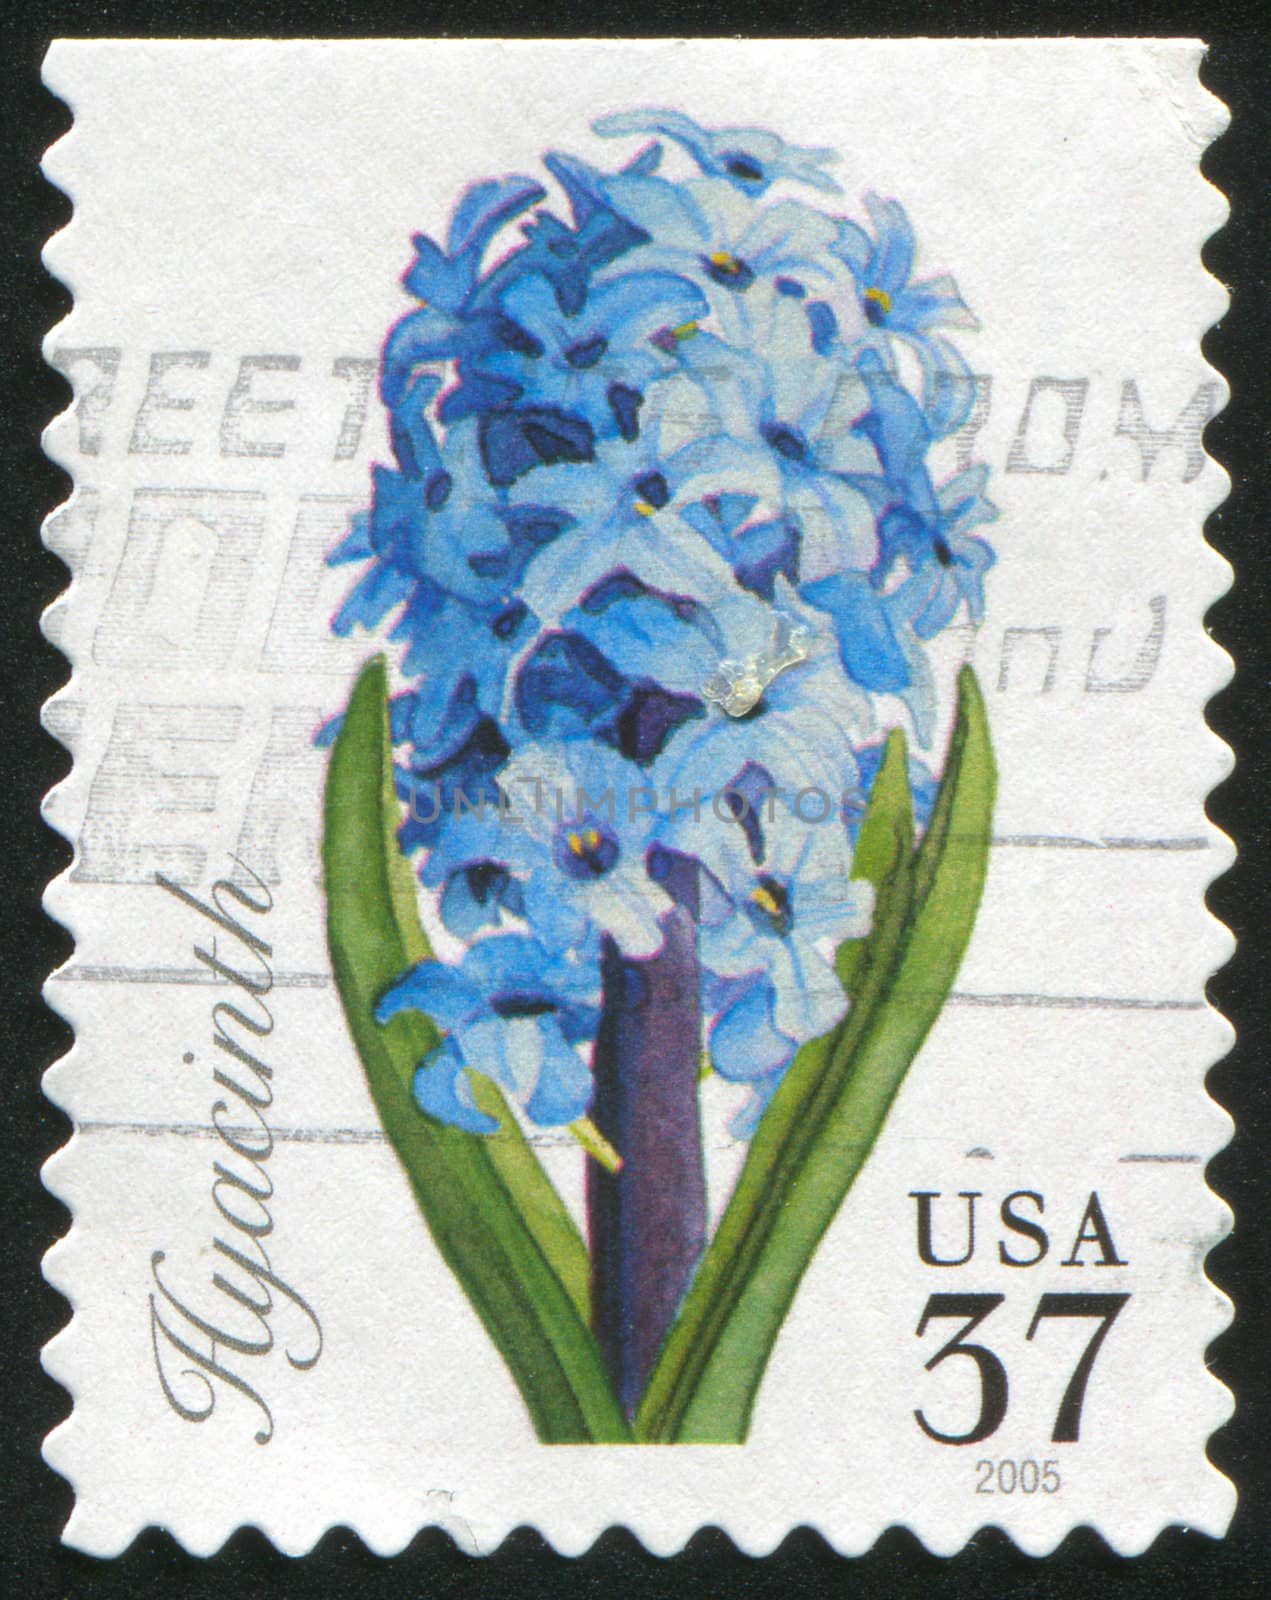 UNITED STATES - CIRCA 1999: stamp printed by United states, shows Hyacinth, circa 1999